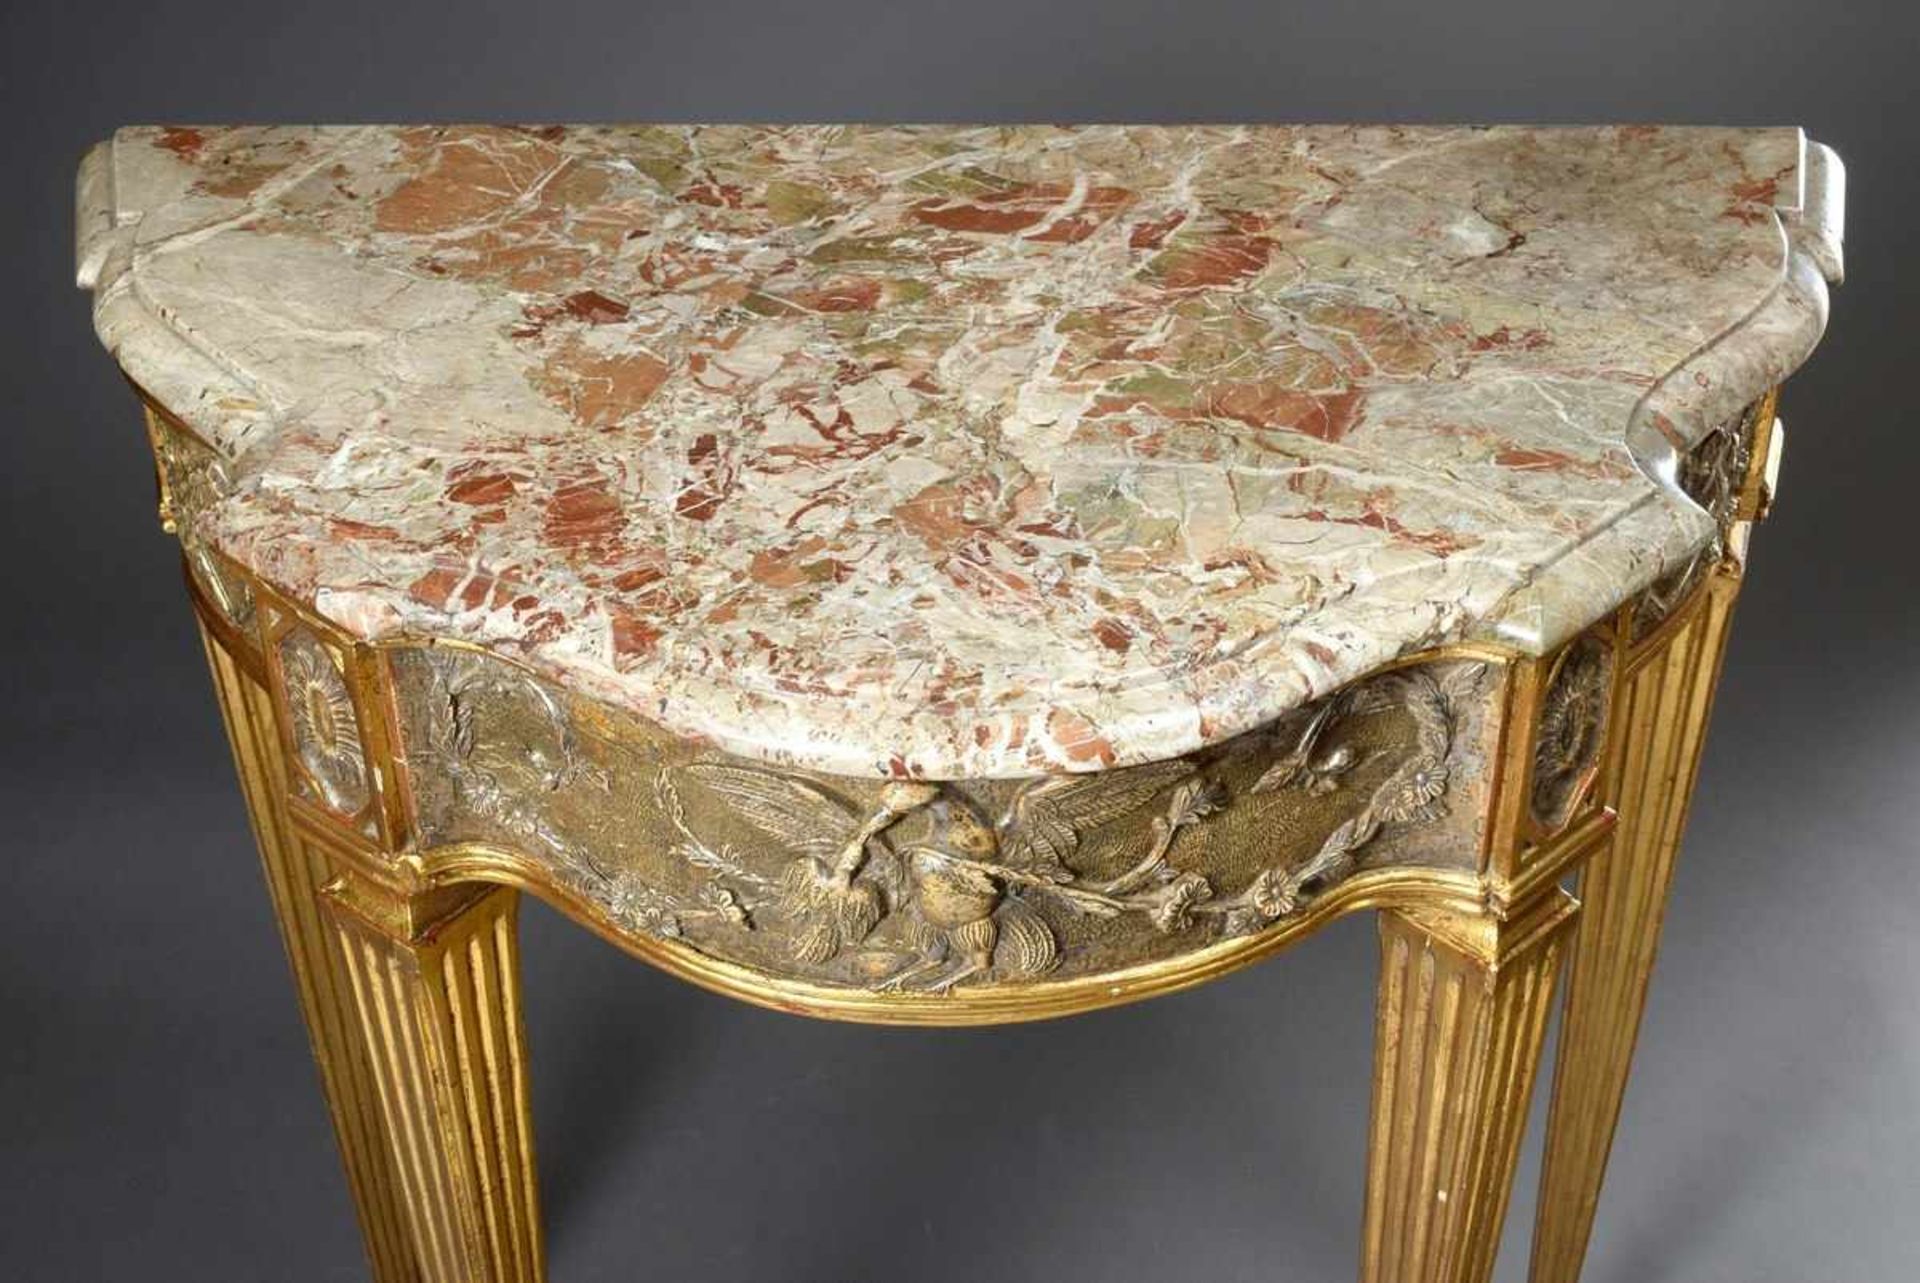 Courtly Louis XVI console on pointed legs with floral and ornamental relief carving "Birds" in the - Image 2 of 6